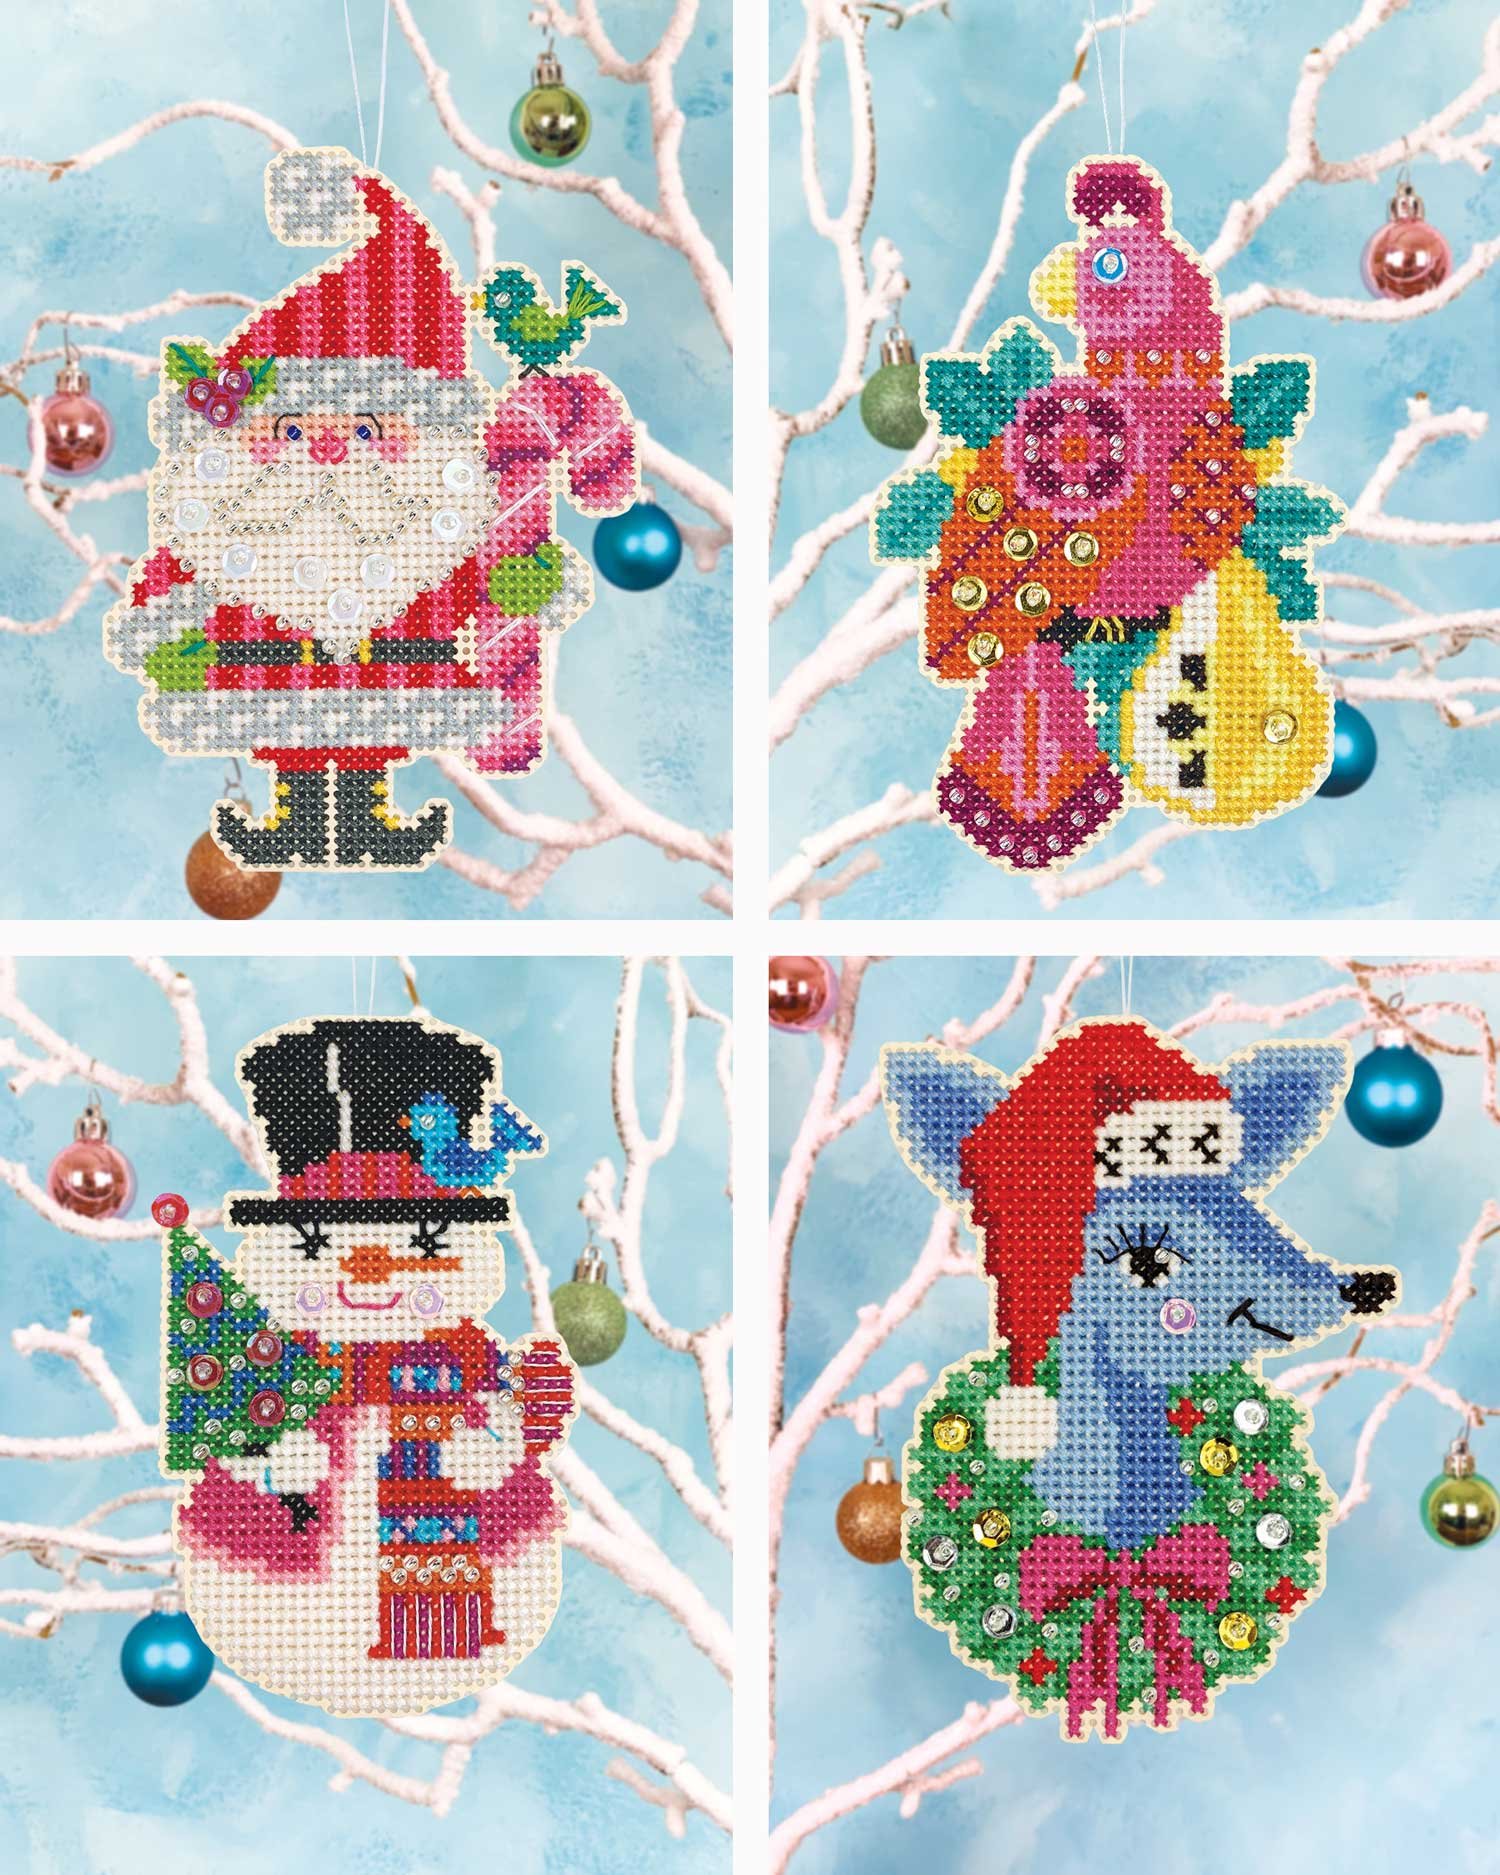 How to Make Cross Stitch Christmas Ornaments